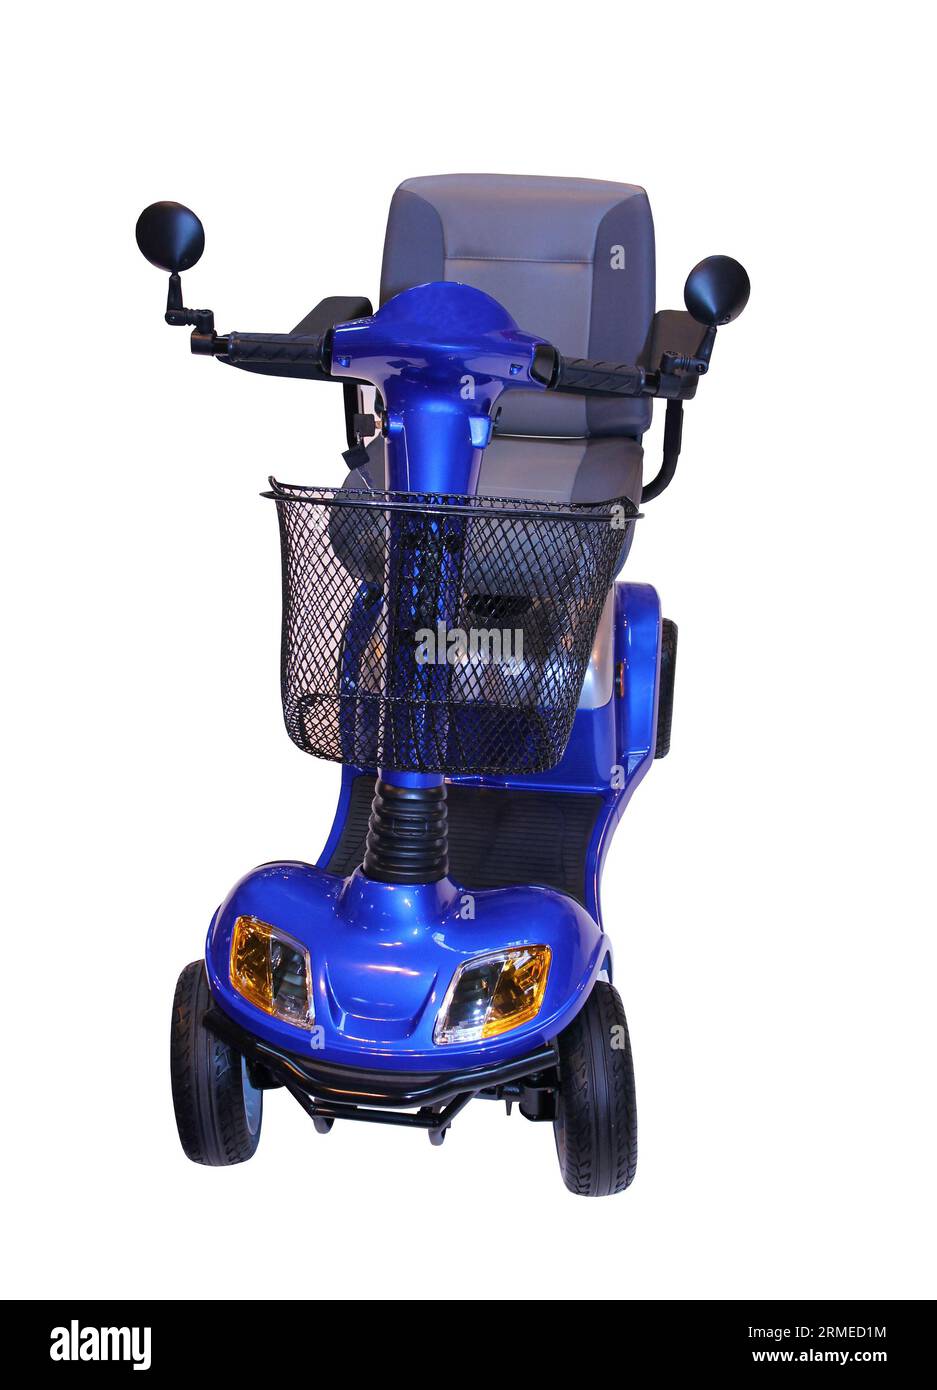 A Modern Electric Disability Scooter with Four Wheels. Stock Photo